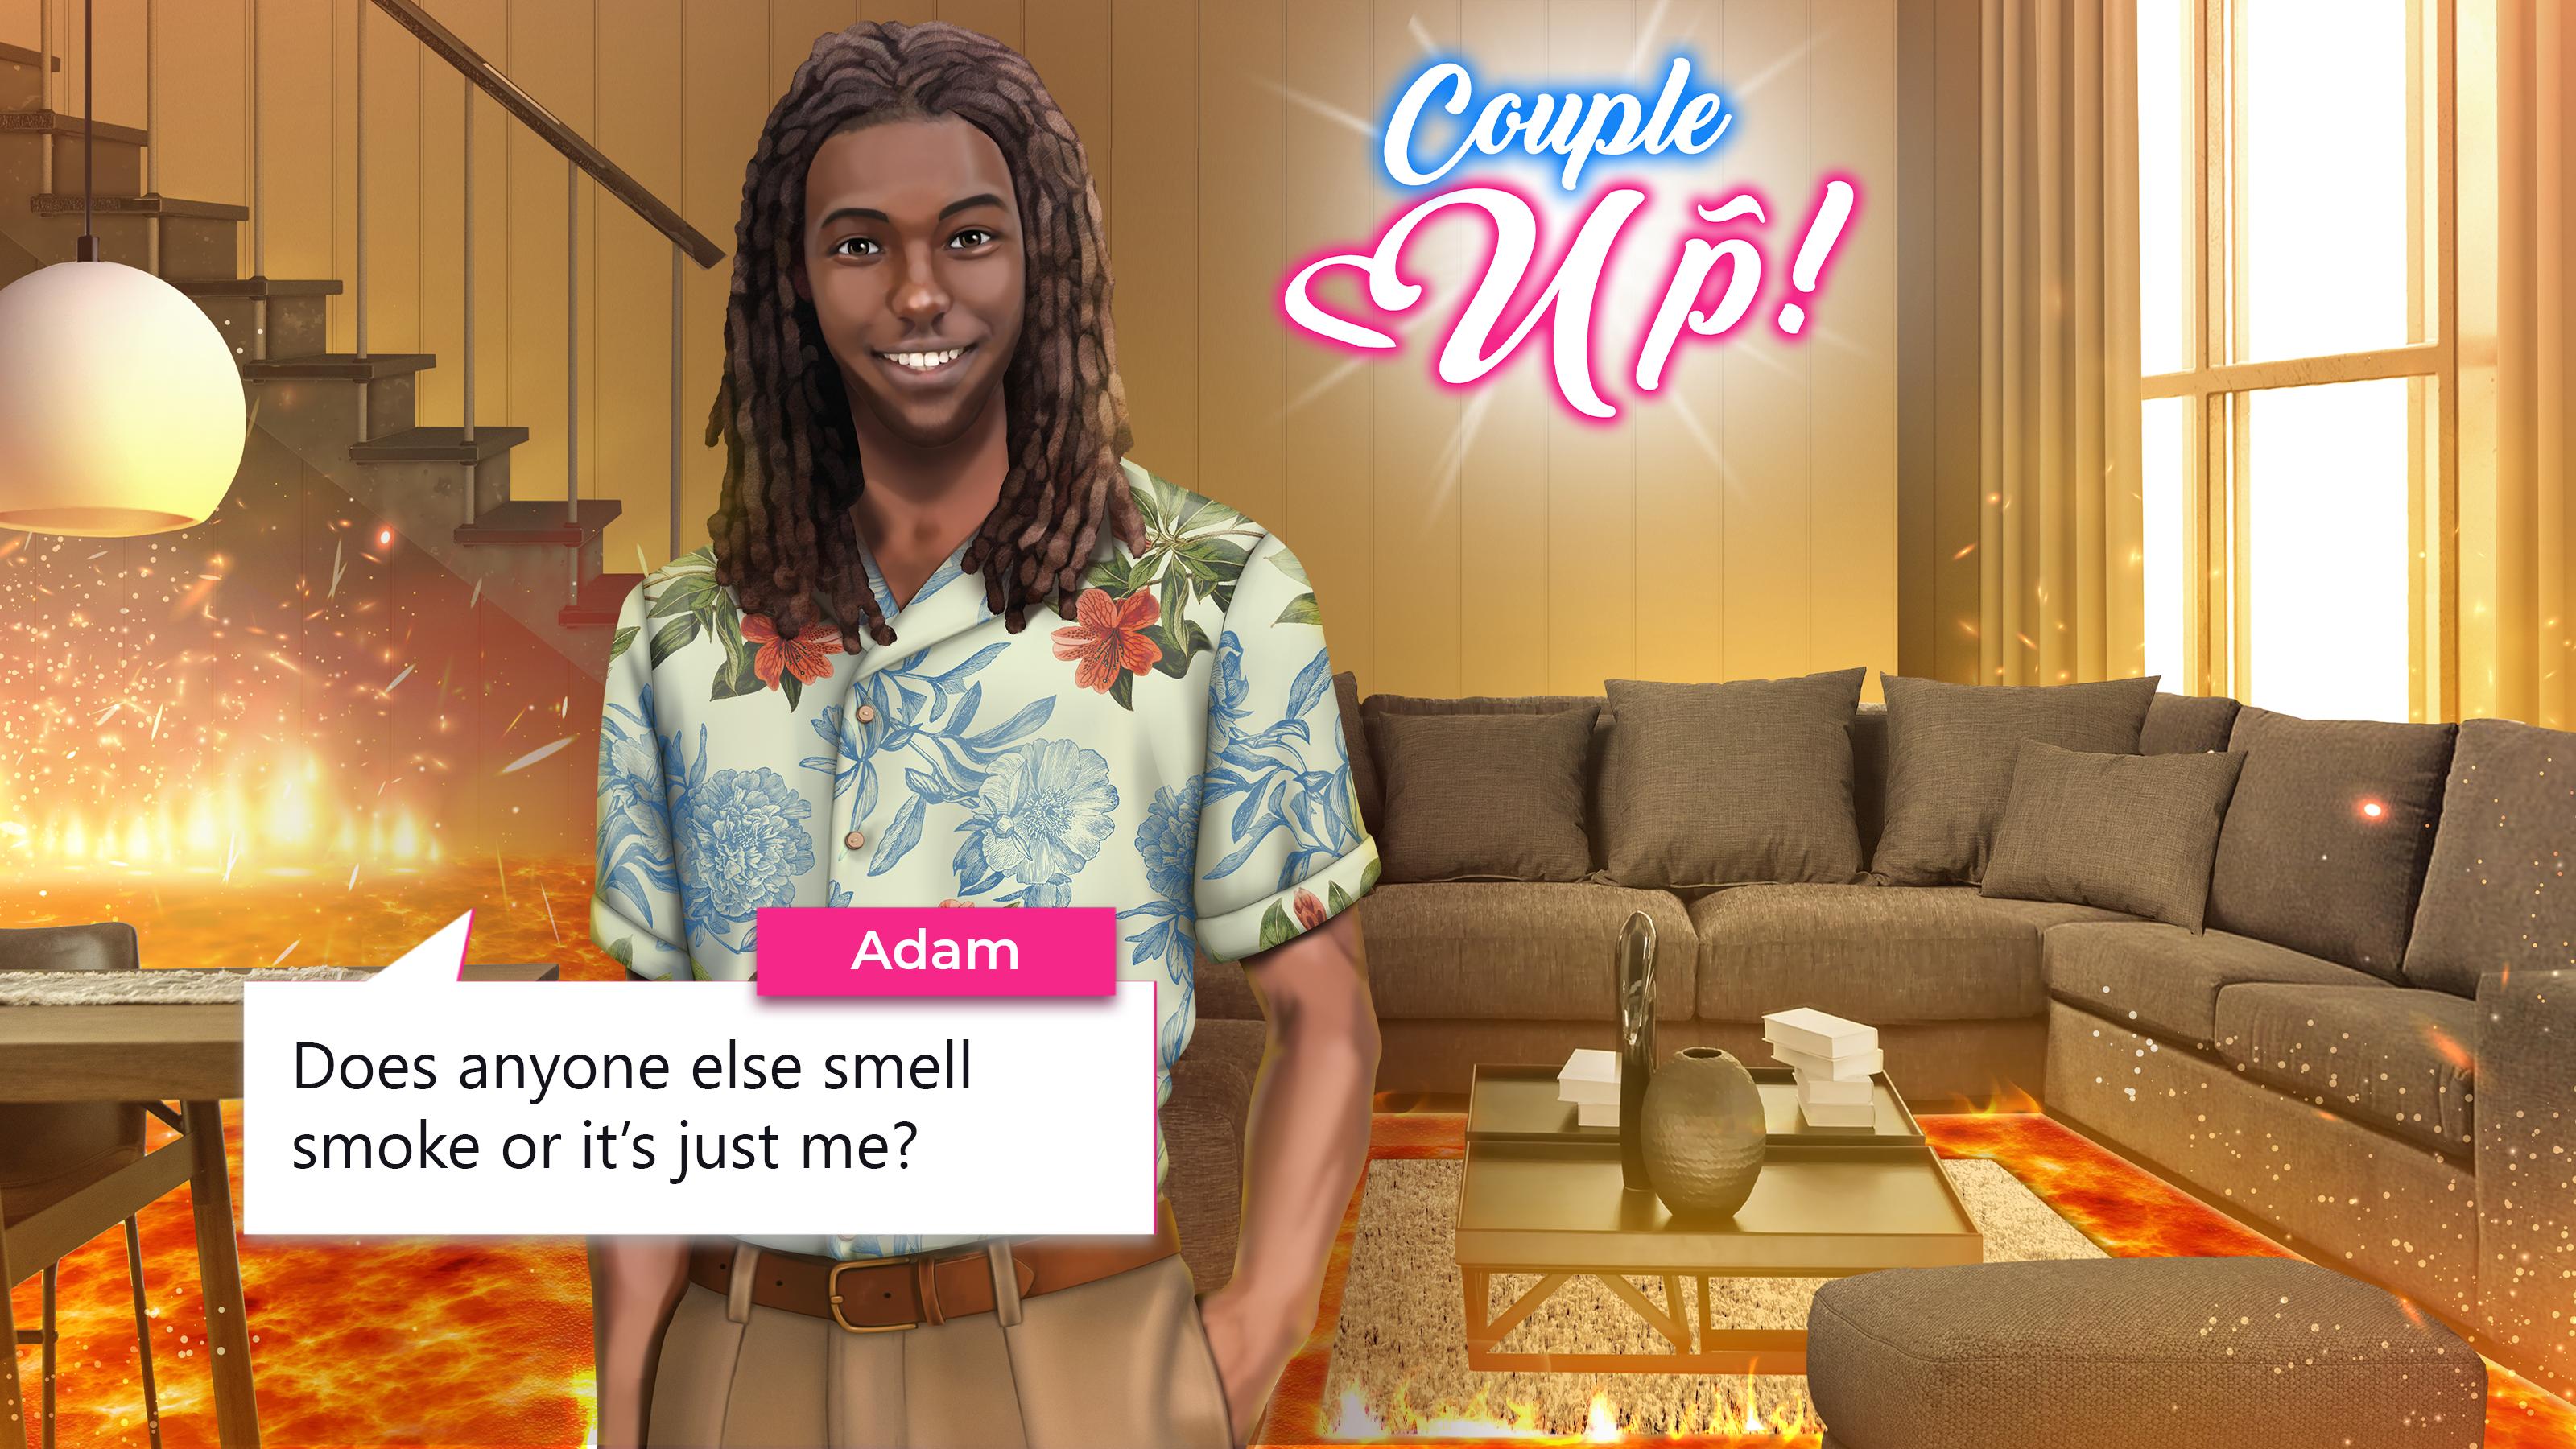 Couple Up! Love Show - Interactive Story 0.7.5 Screenshot 16